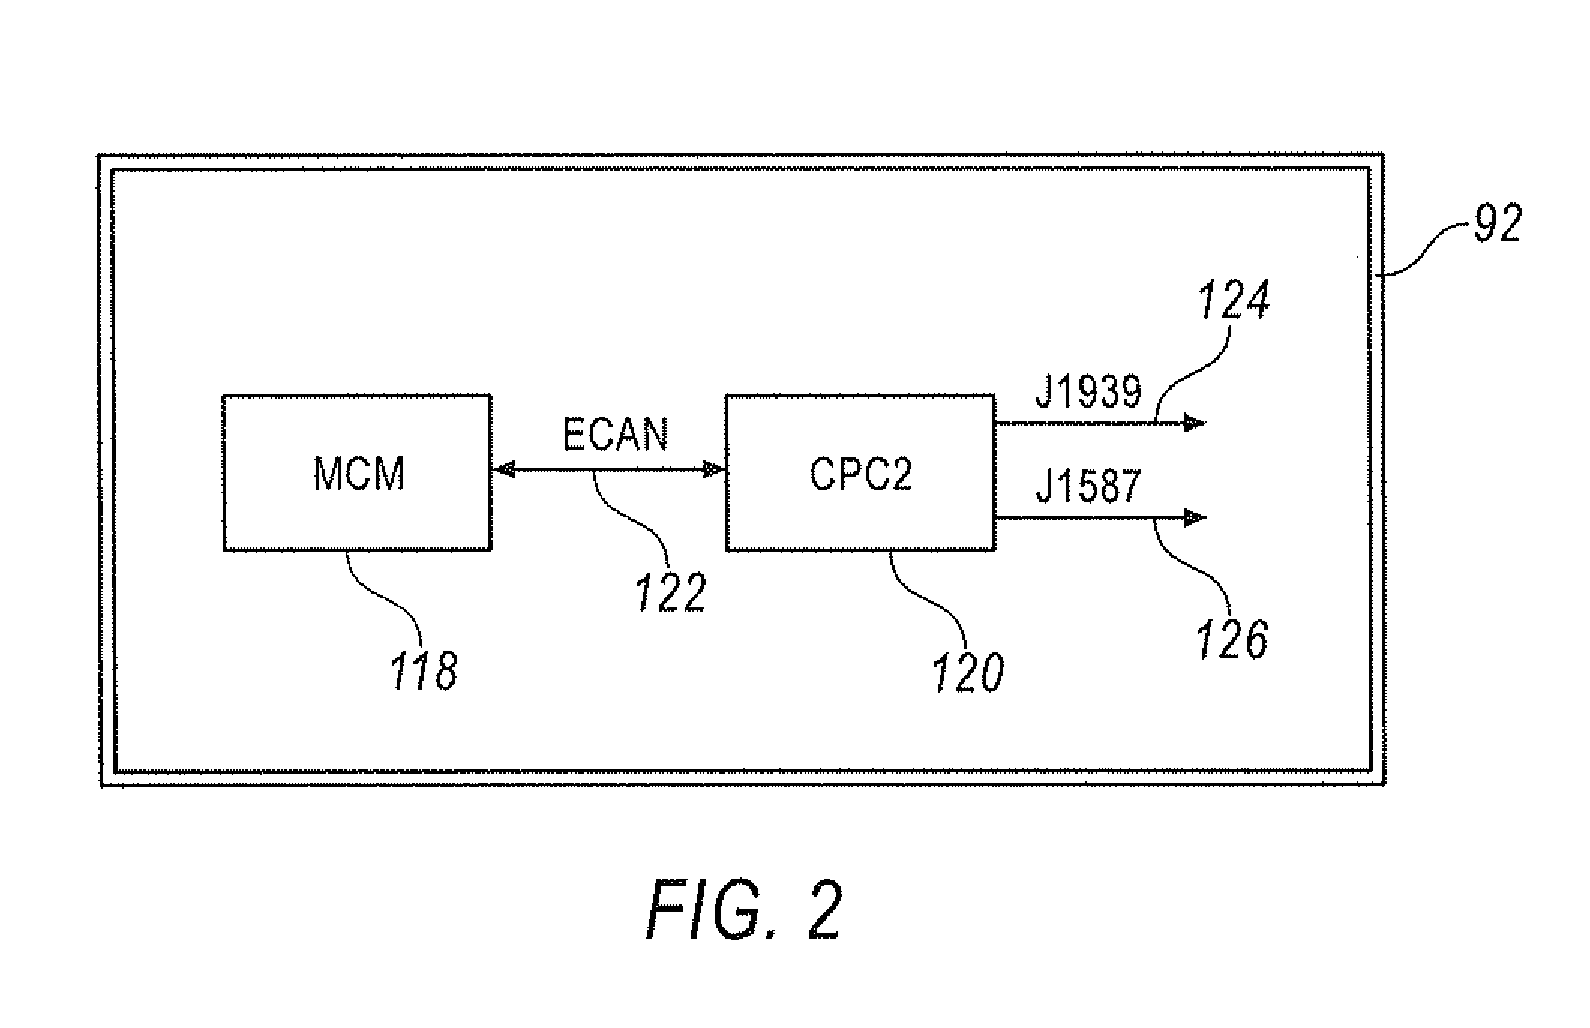 Method of verifying component functionality on EGR and air systems